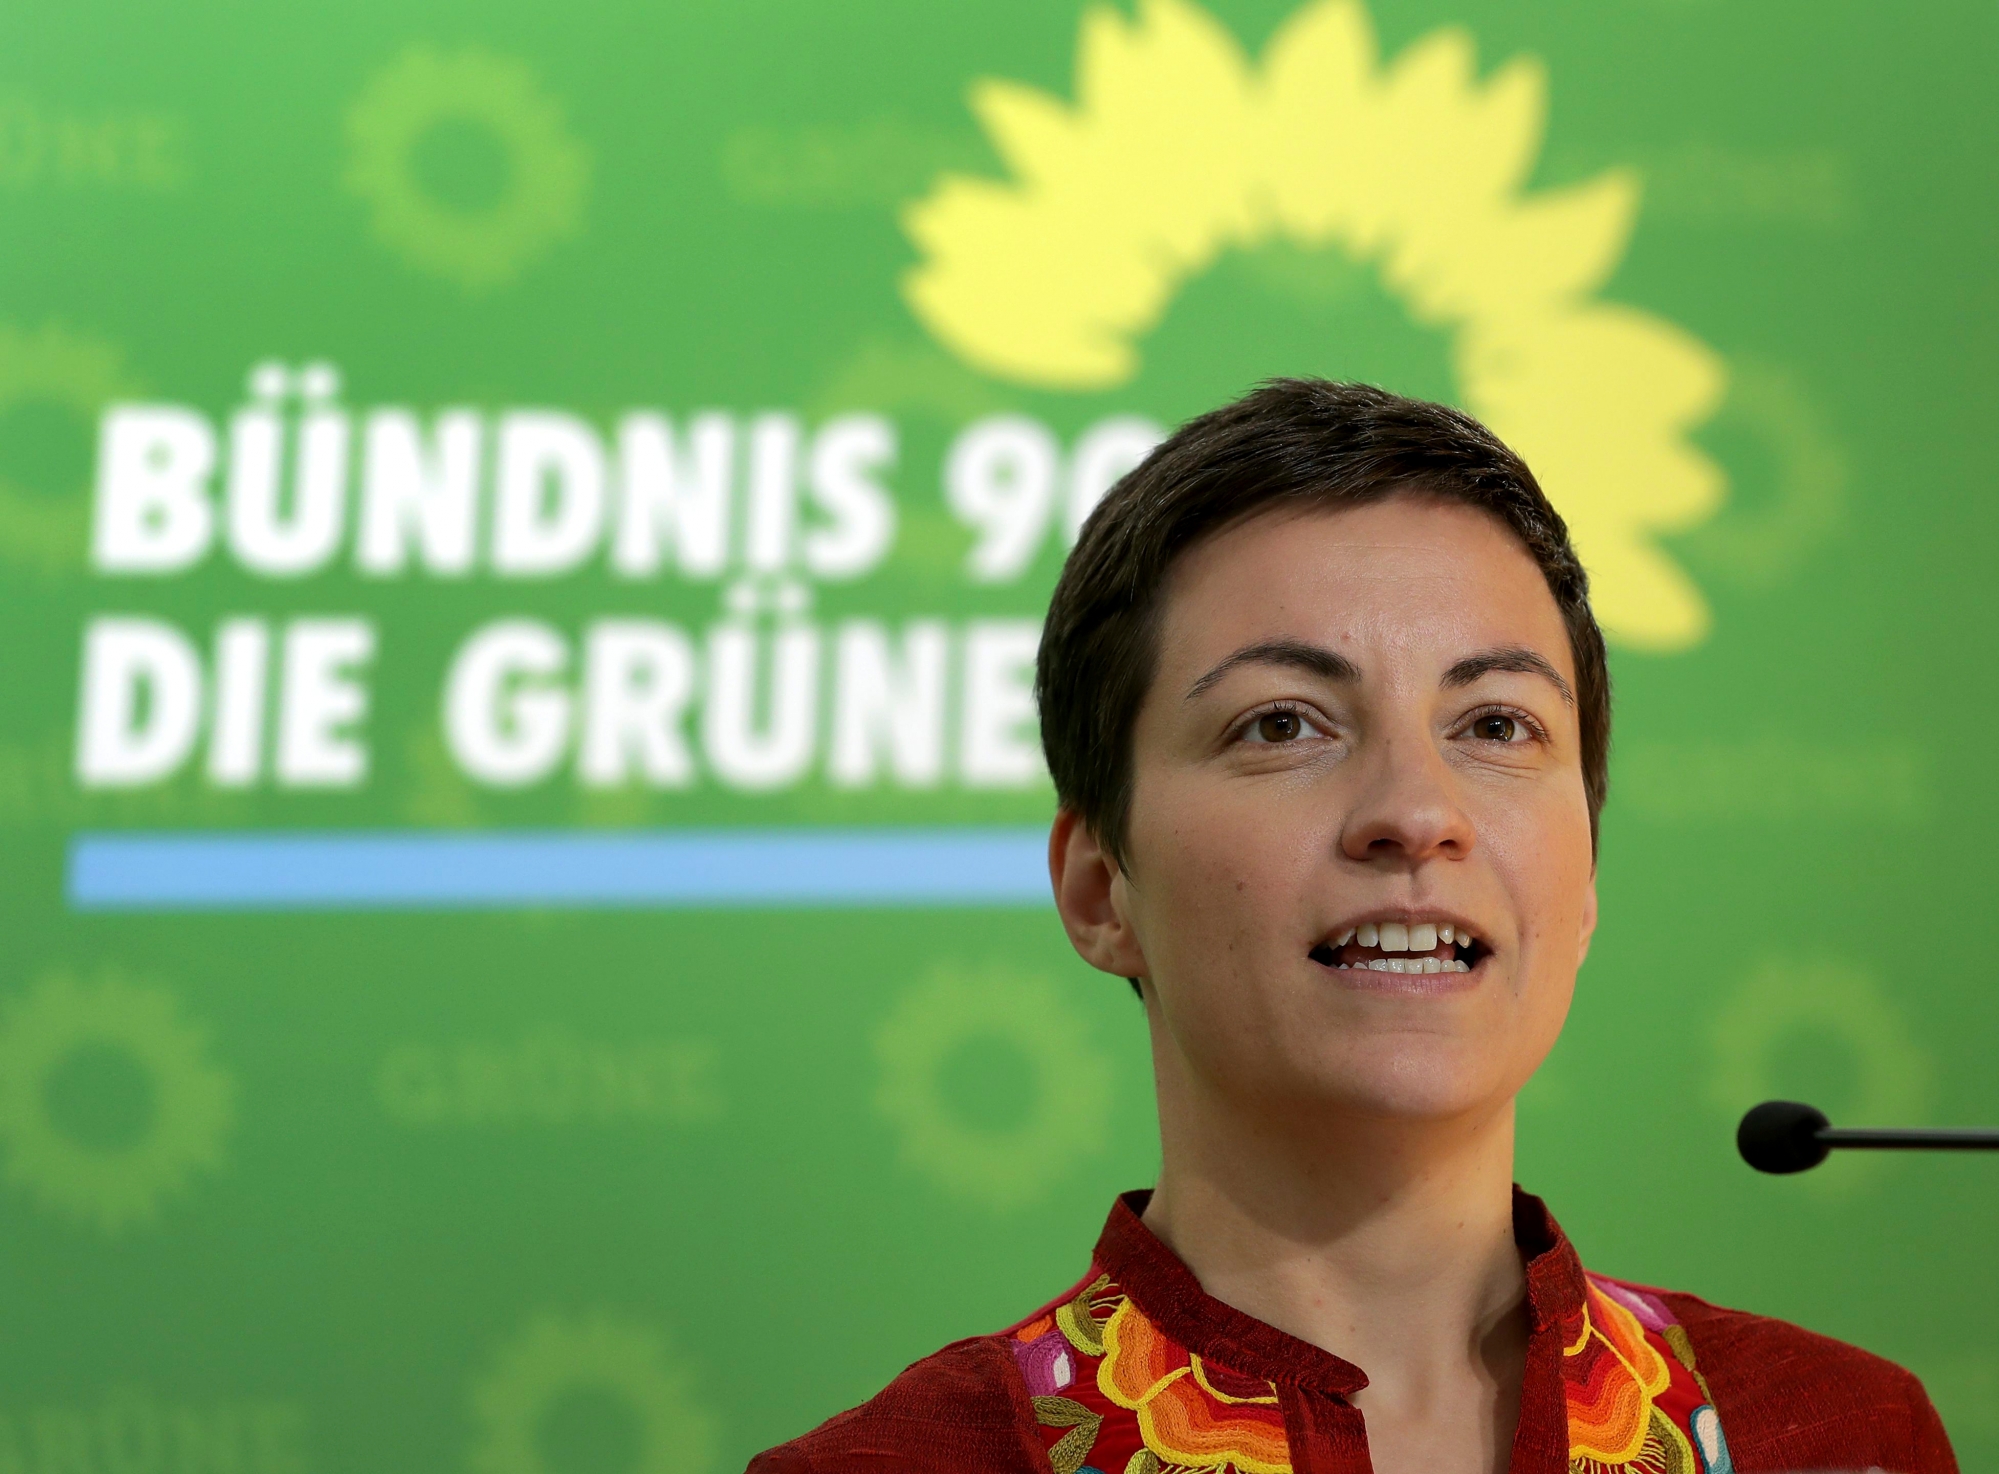 The co-top candidate of the European Green Party for the upcoming european elections, Ska Keller, addresses the media during a press conference at the headquarters of the German Green party in Berlin, Germany, Monday, May 13, 2019. (AP Photo/Michael Sohn) Germany European Elections